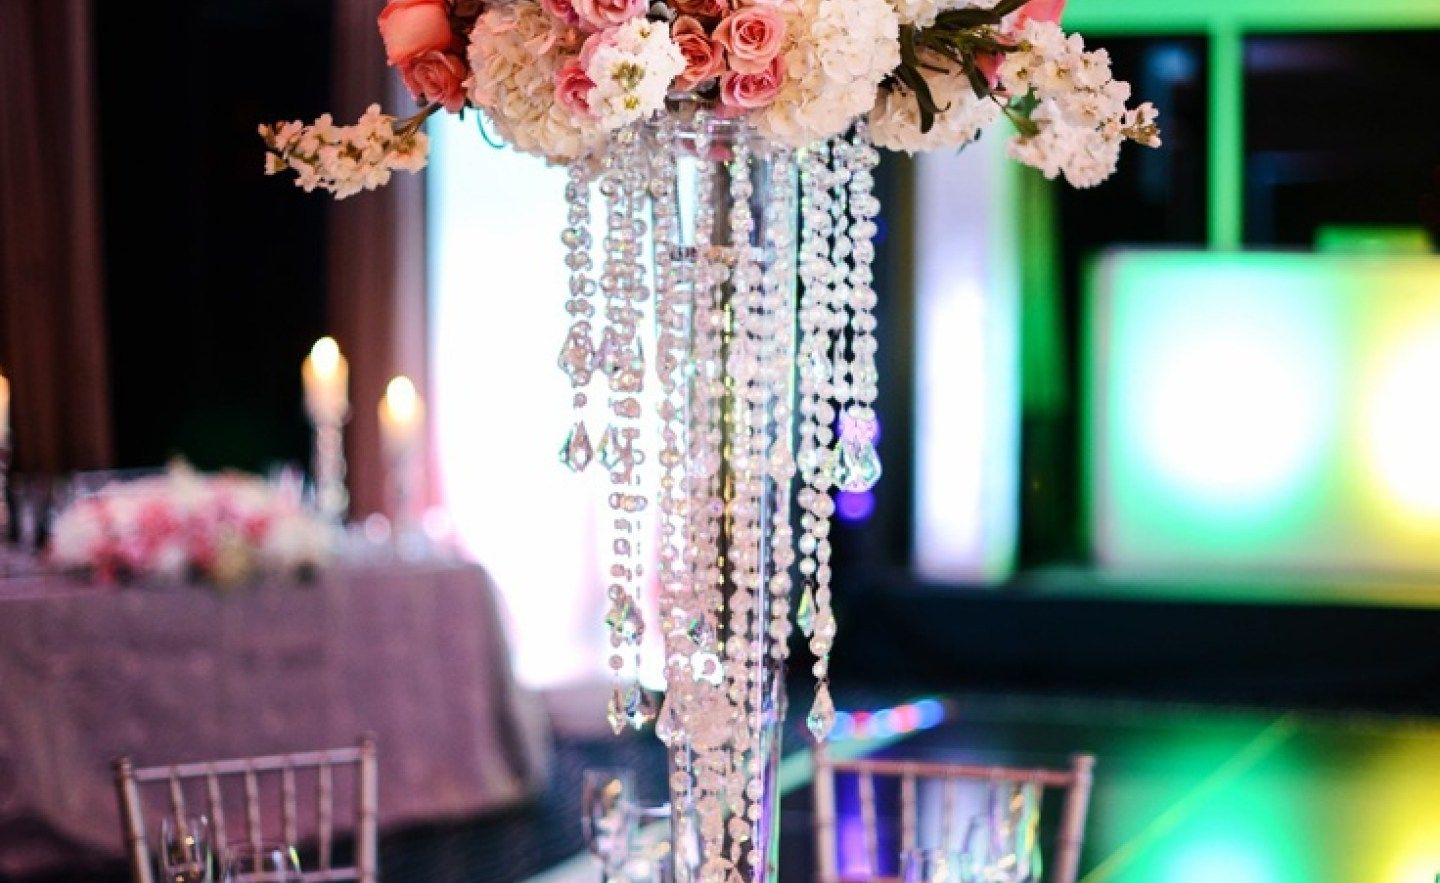 Chandelier : Stunning Faux Crystal Chandelier Wedding Bead Strands Throughout Most Up To Date Faux Crystal Chandelier Wedding Bead Strands (View 8 of 15)